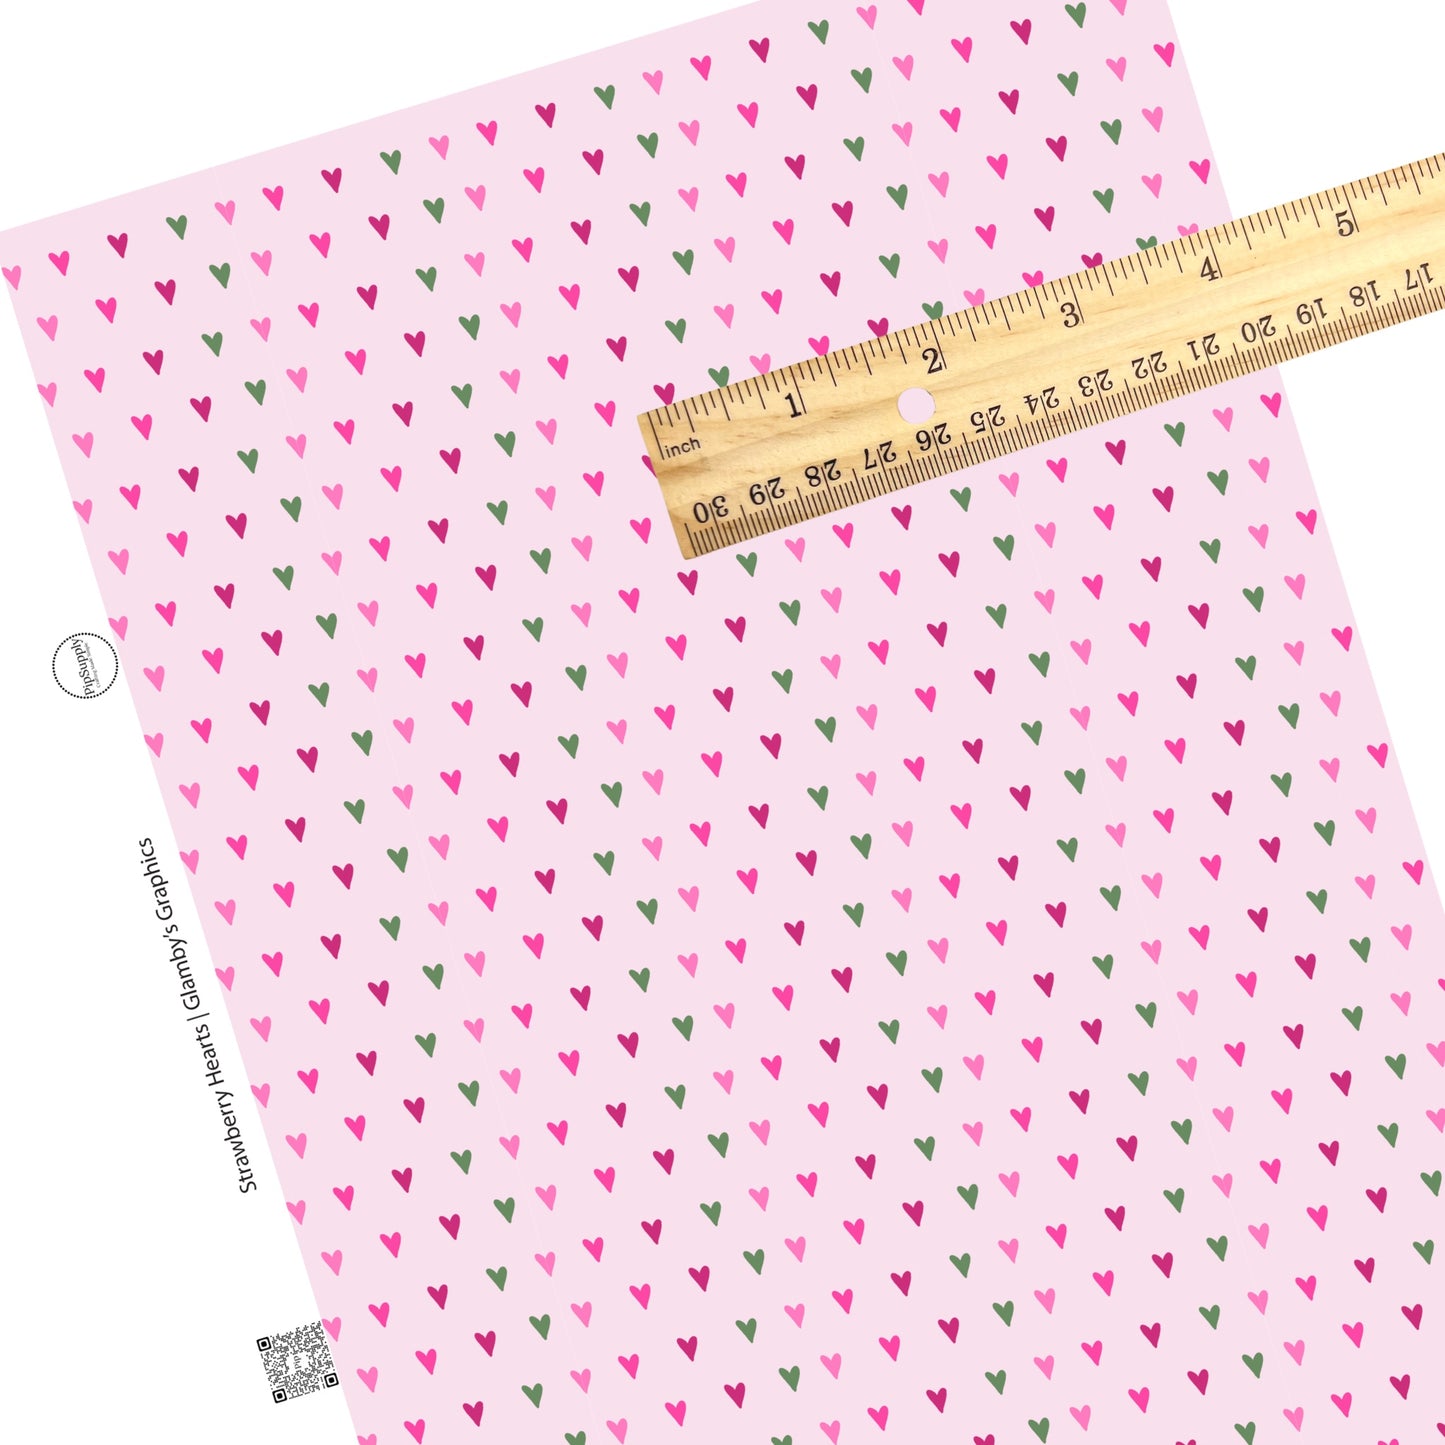 These Valentine's pattern themed faux leather sheets contain the following design elements: rows of pink and green hearts on light pink. Our CPSIA compliant faux leather sheets or rolls can be used for all types of crafting projects.